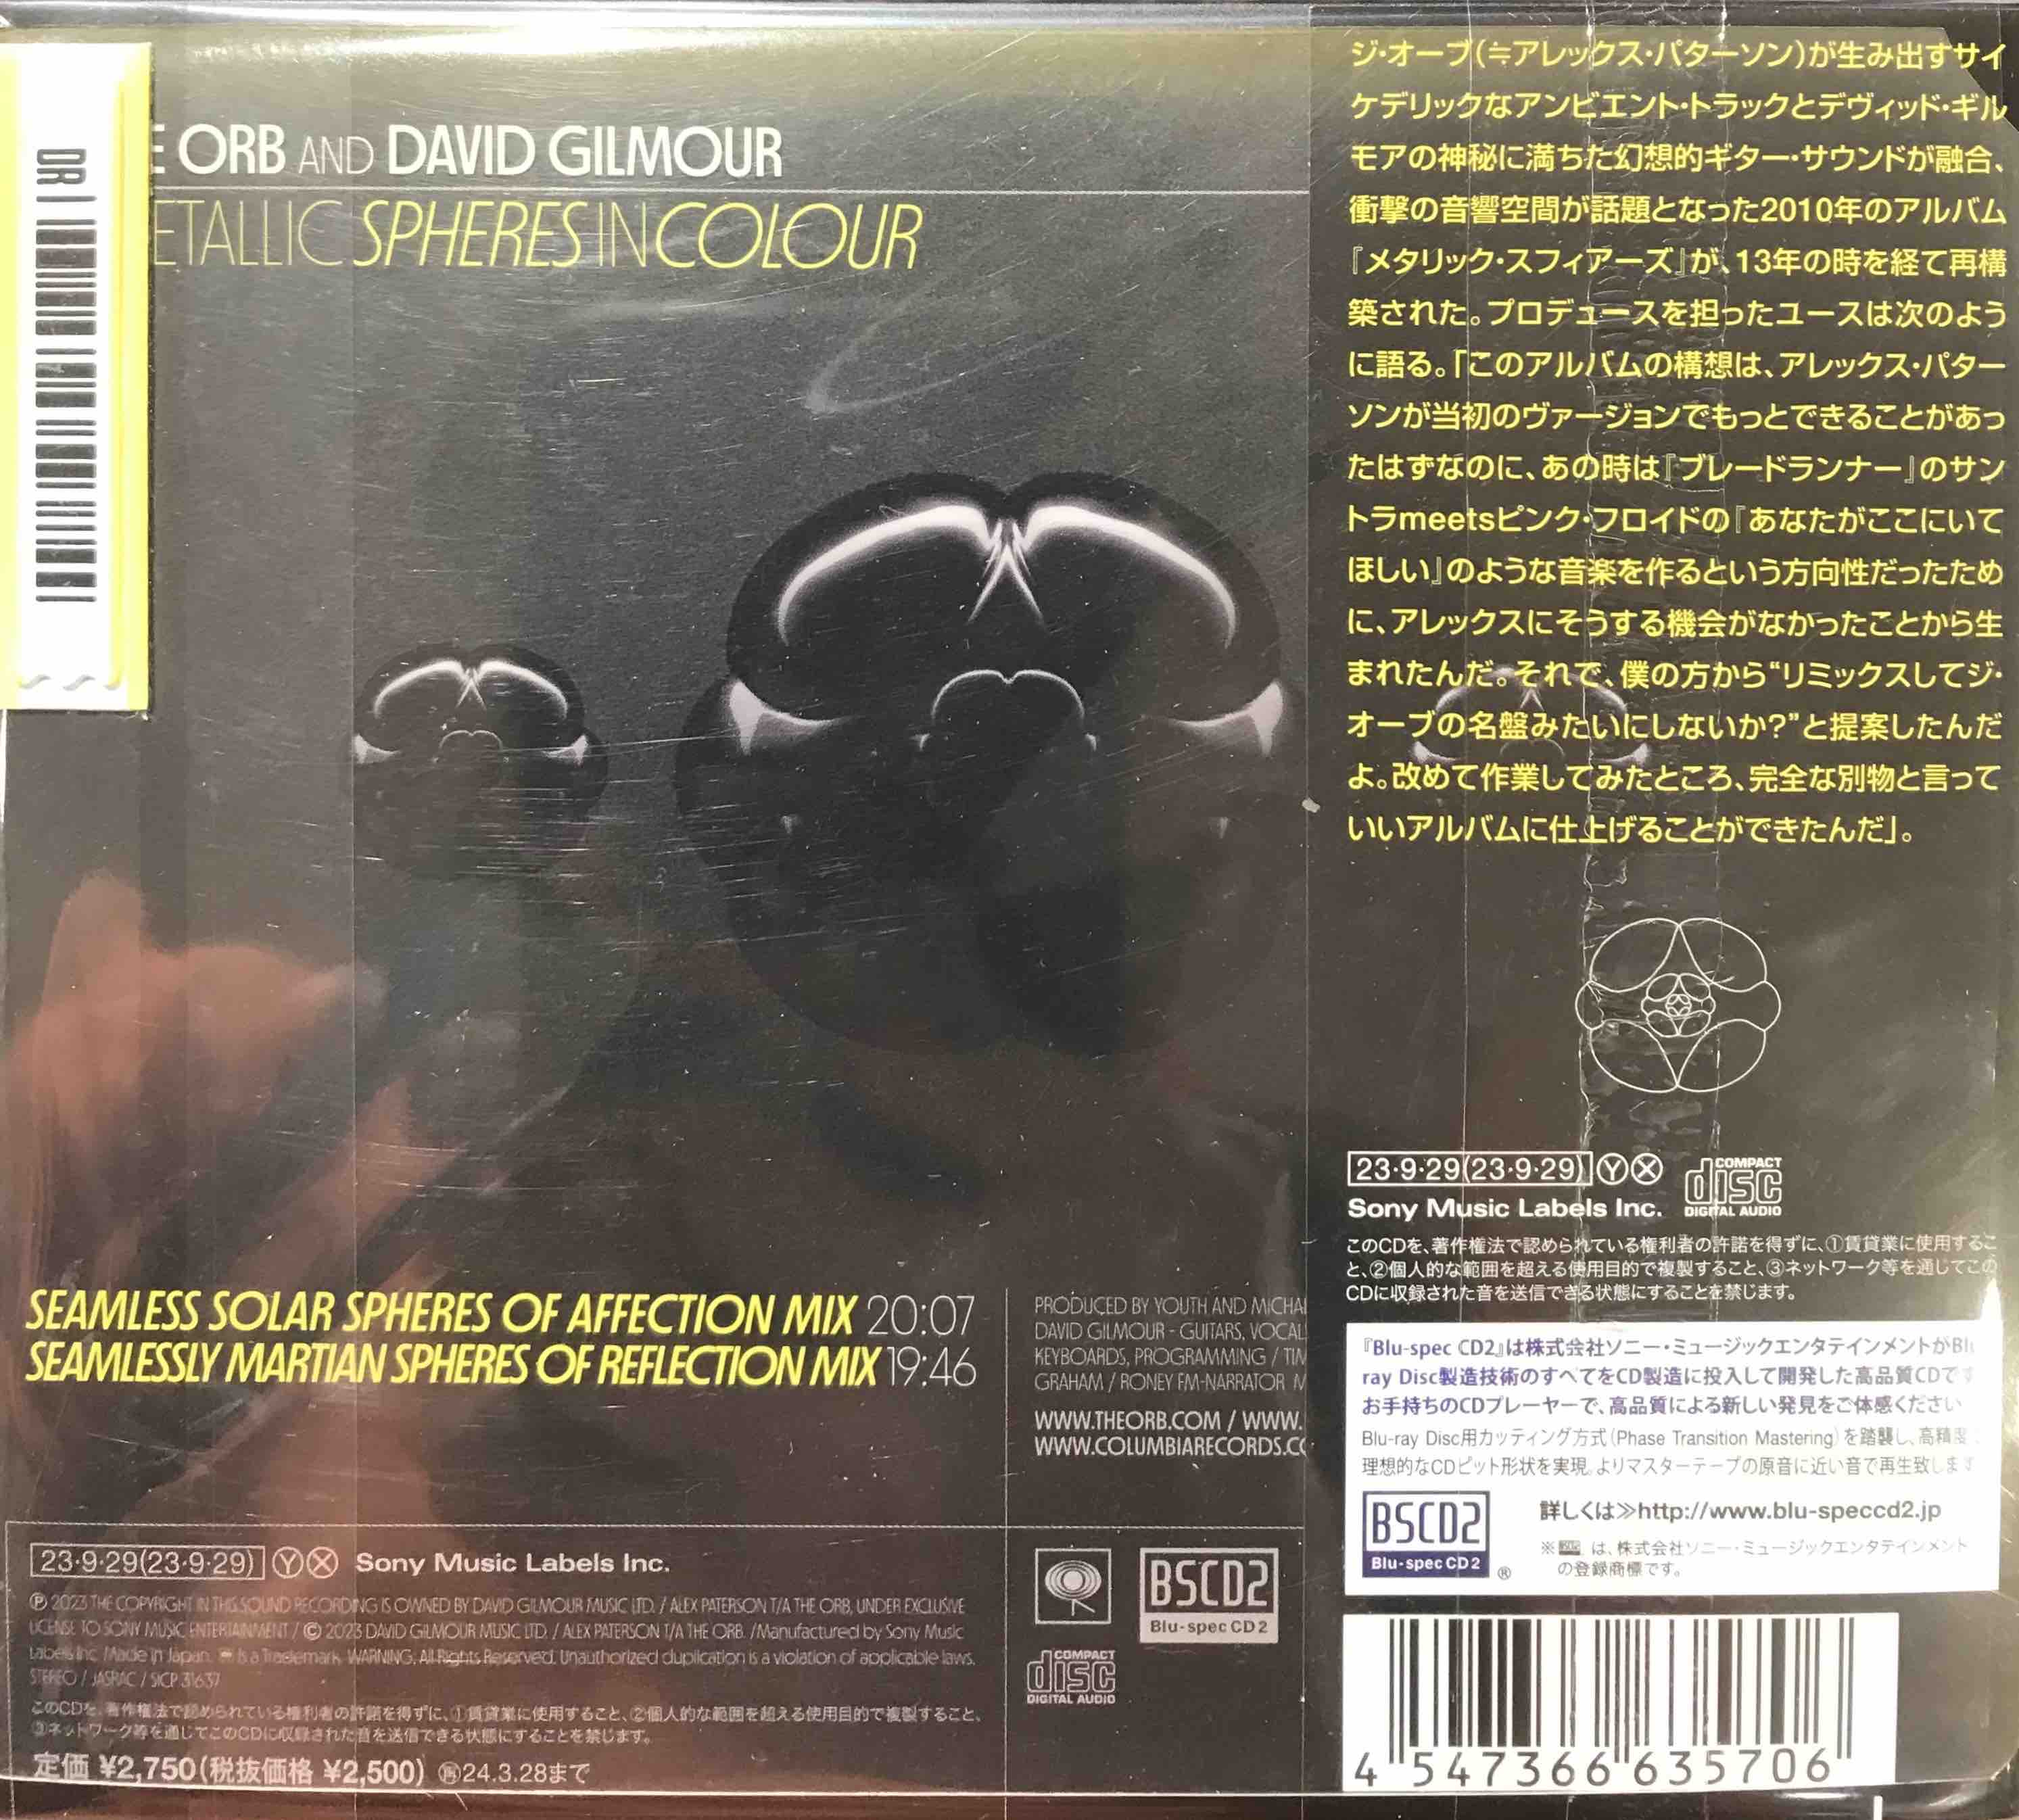 The Orb And David Gilmour ‎– Metallic Spheres In Colour